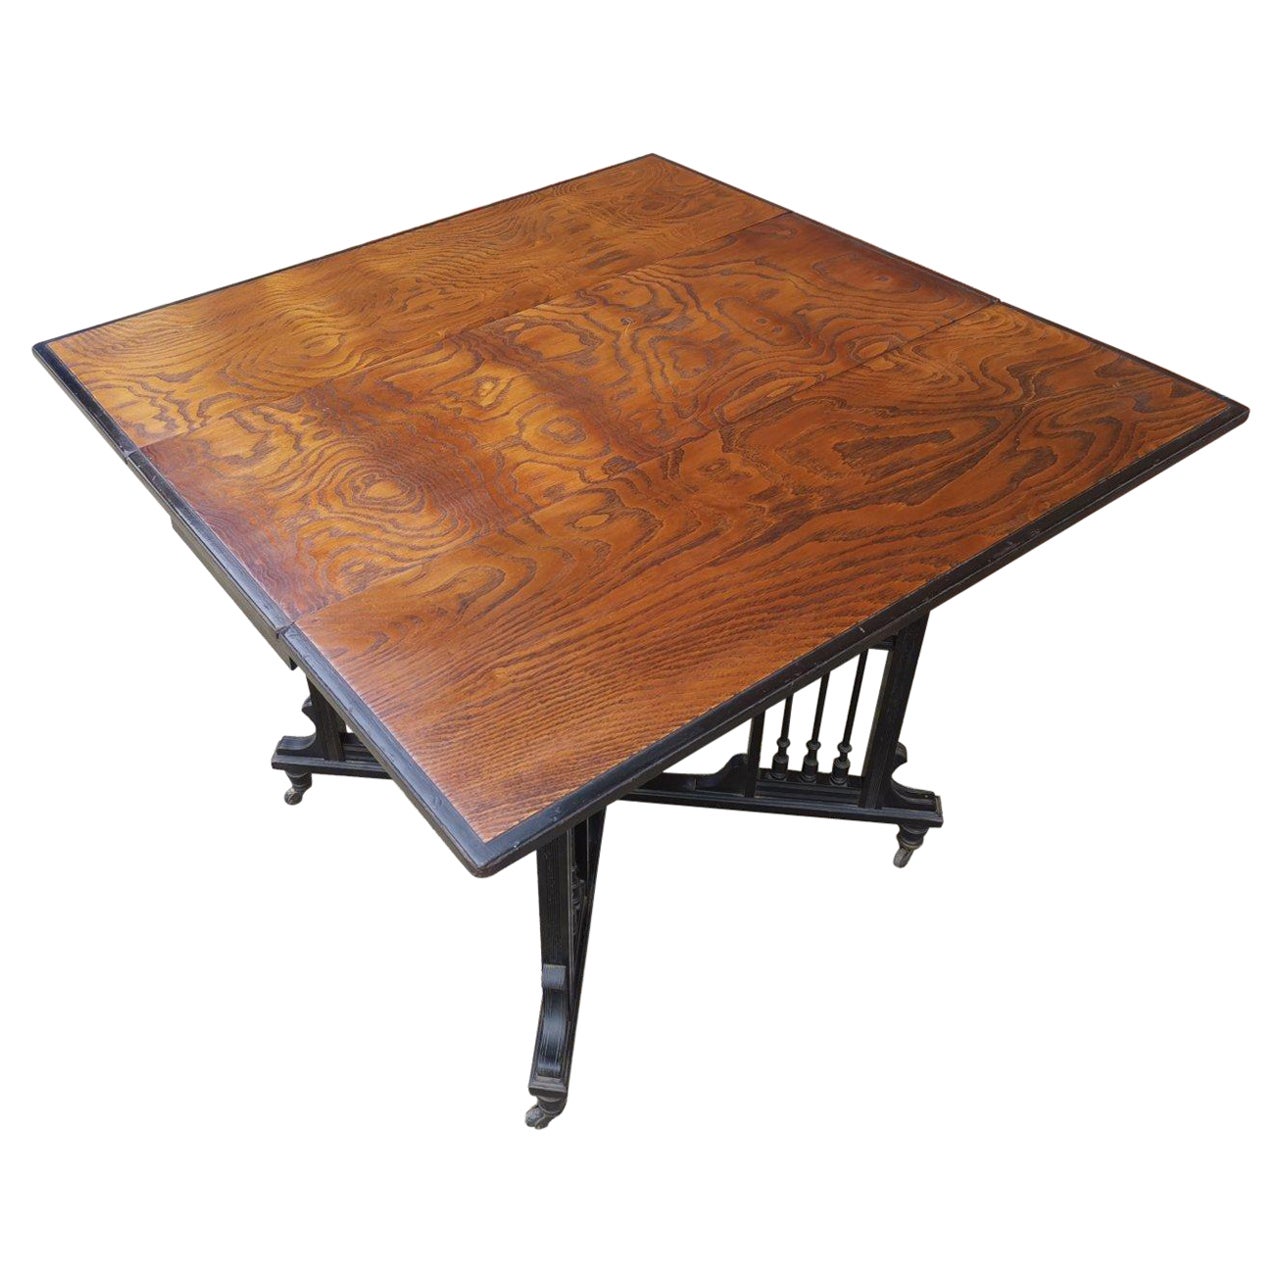 Aesthetic Movement Scissor Action Drop Leaf Side Table Made from Hungarian Ash For Sale